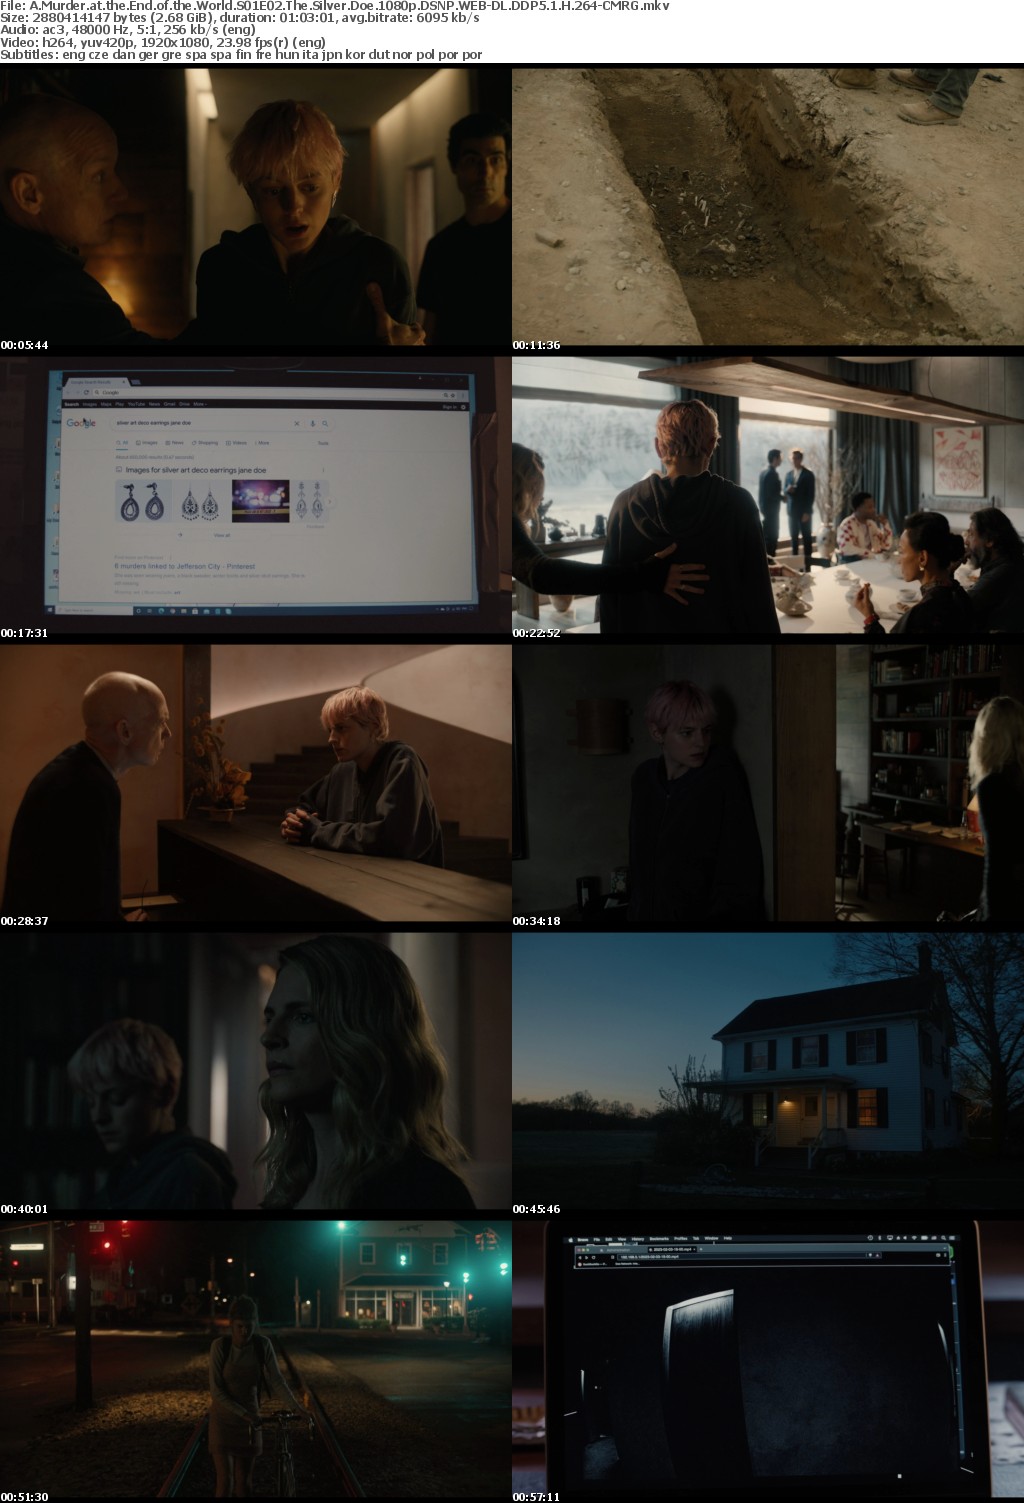 A Murder at the End of the World S01E02 The Silver Doe 1080p DSNP WEB-DL DDP5 1 H 264-CMRG